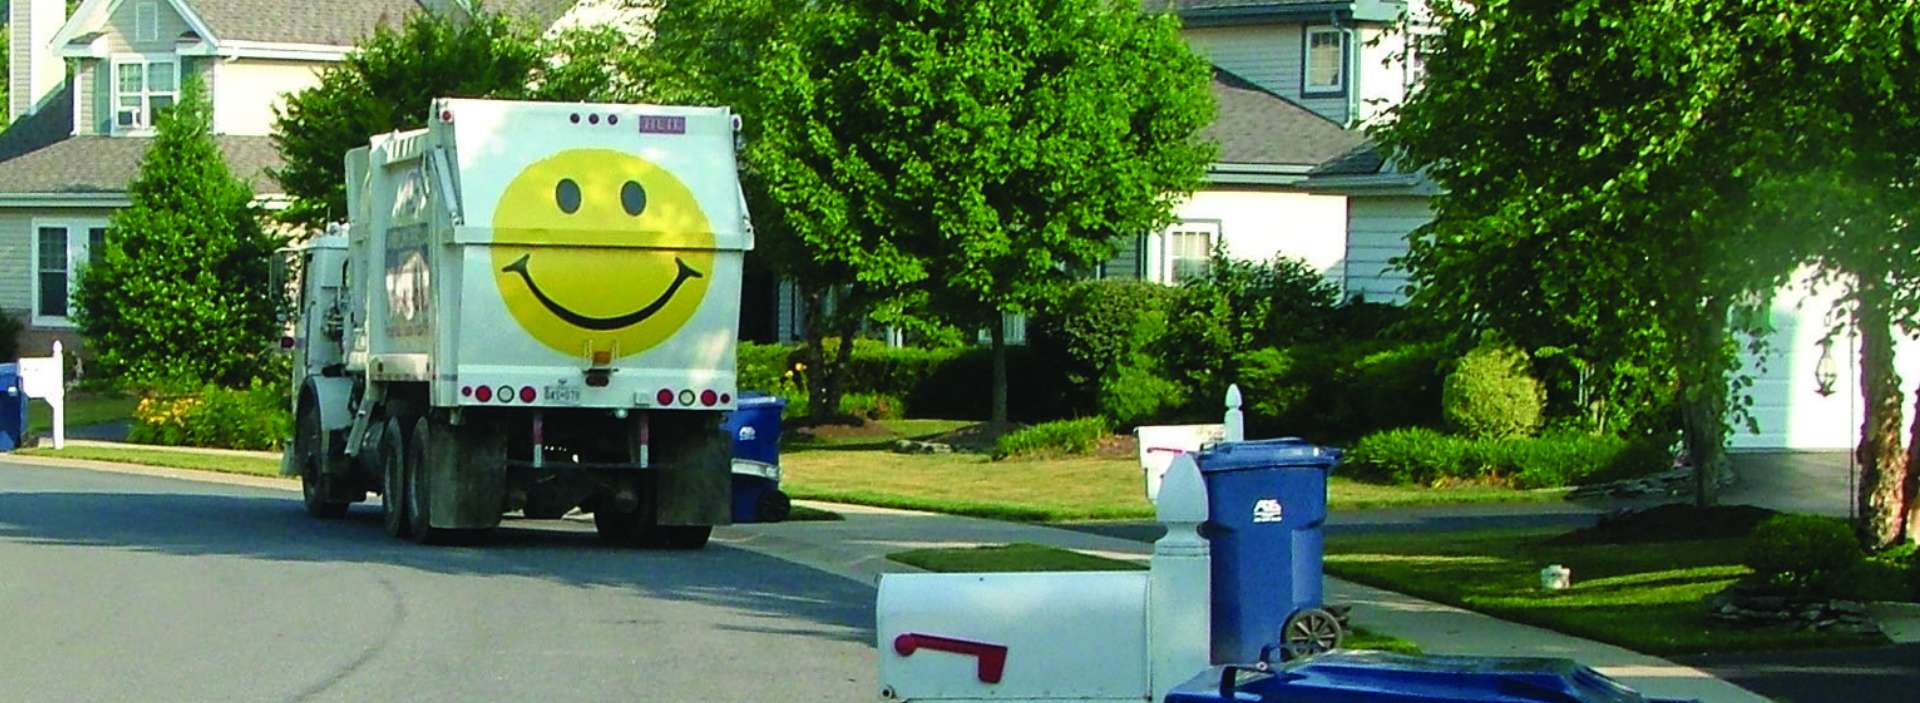 ads trash truck in a residential neighborhood on a sunny day